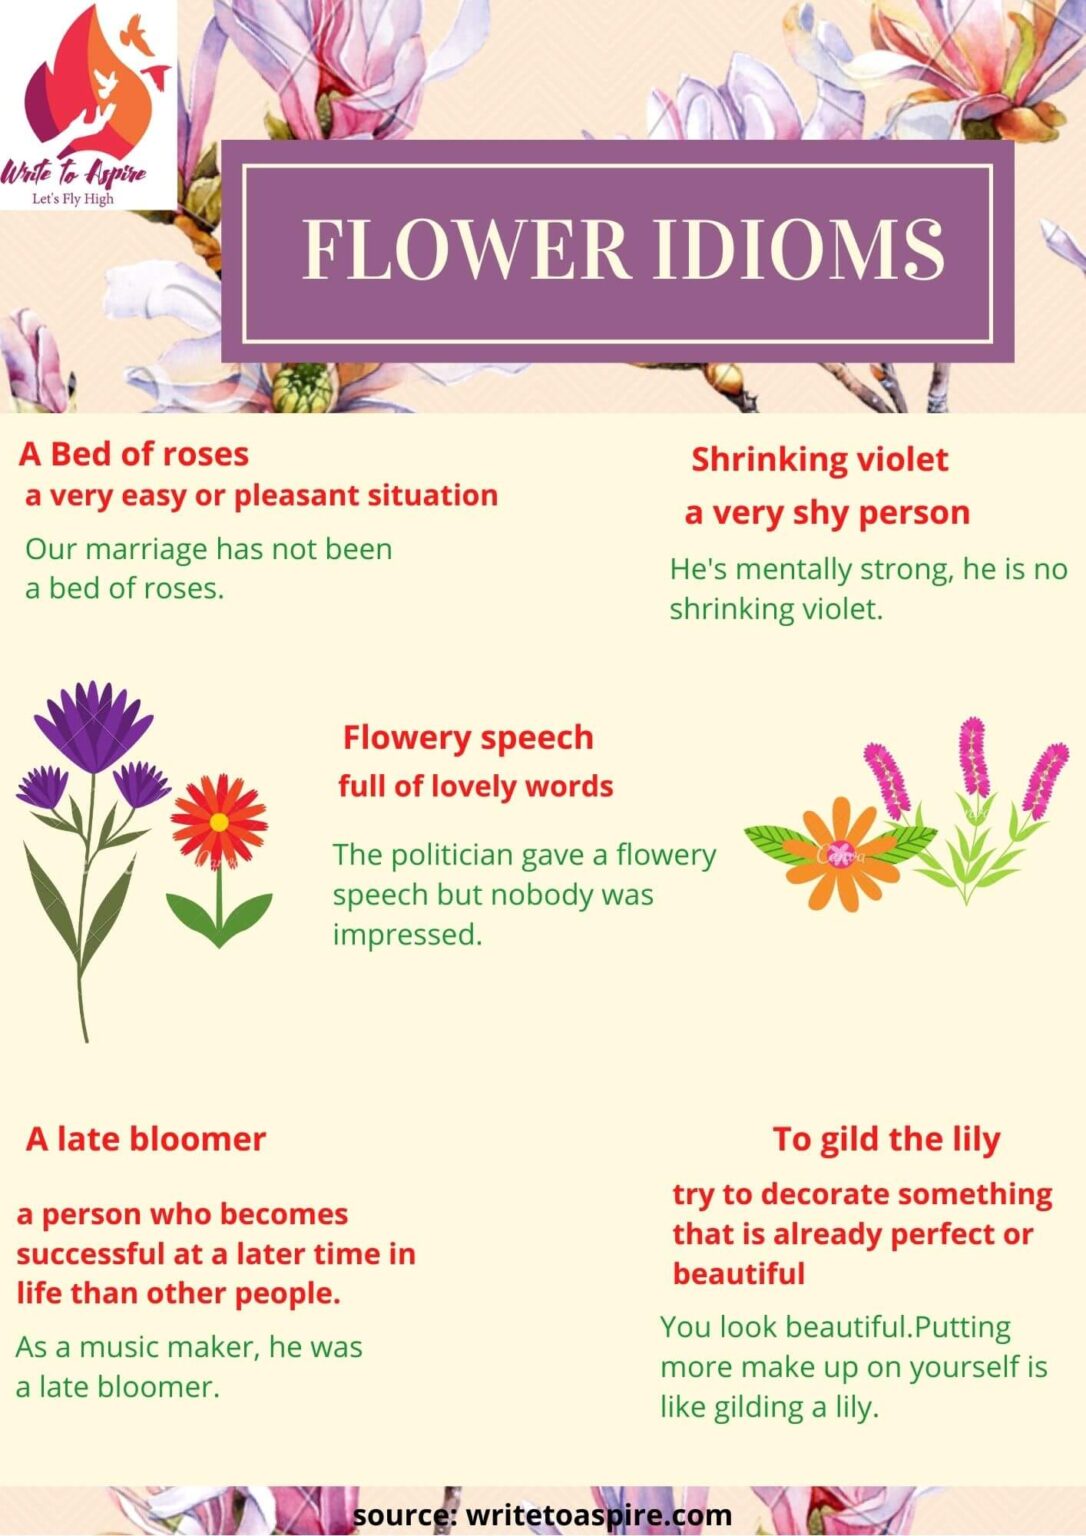 Flower Idioms | Learn how to use flower idioms to adorn your writing